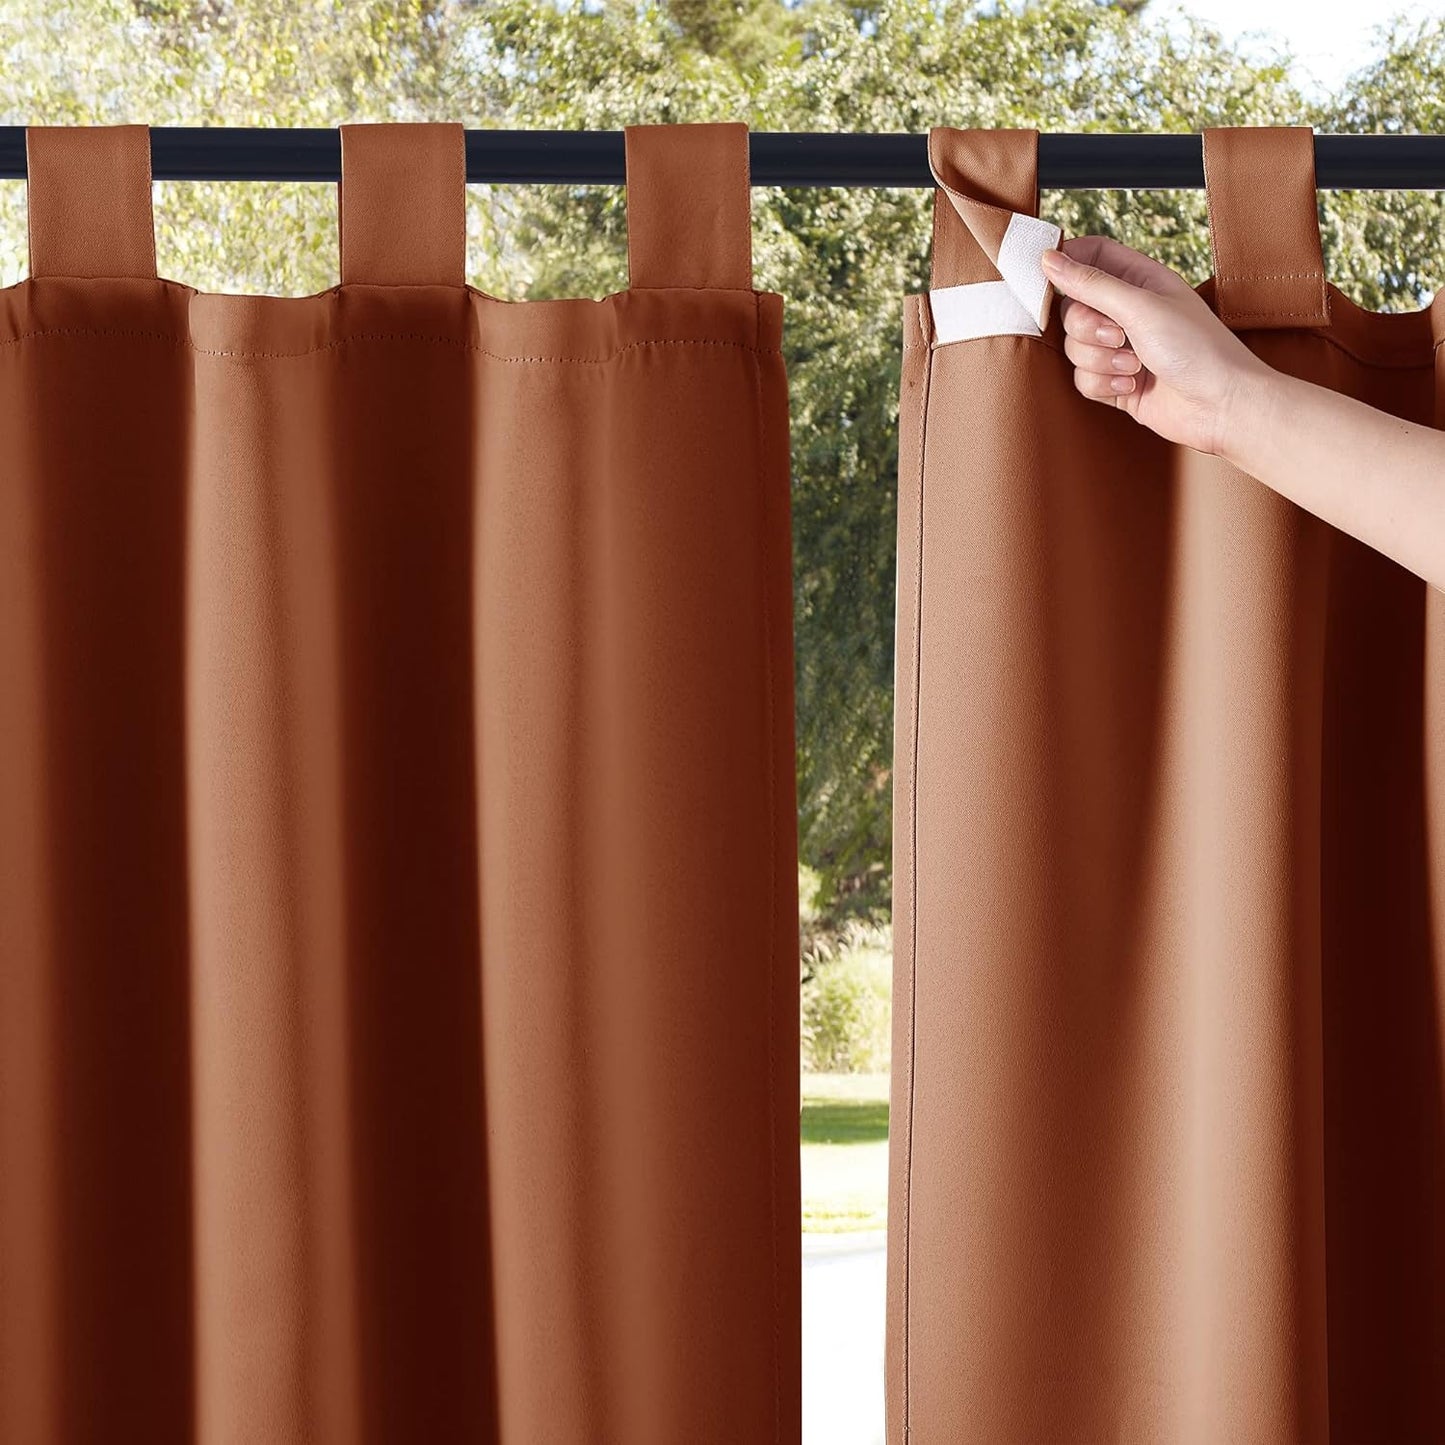 NICETOWN 2 Panels Outdoor Patio Curtainss Waterproof Room Darkening Drapes, Detachable Sticky Tab Top Thermal Insulated Privacy Outdoor Dividers for Porch/Doorway, Biscotti Beige, W52 X L84  NICETOWN Mecca Red W52 X L84 